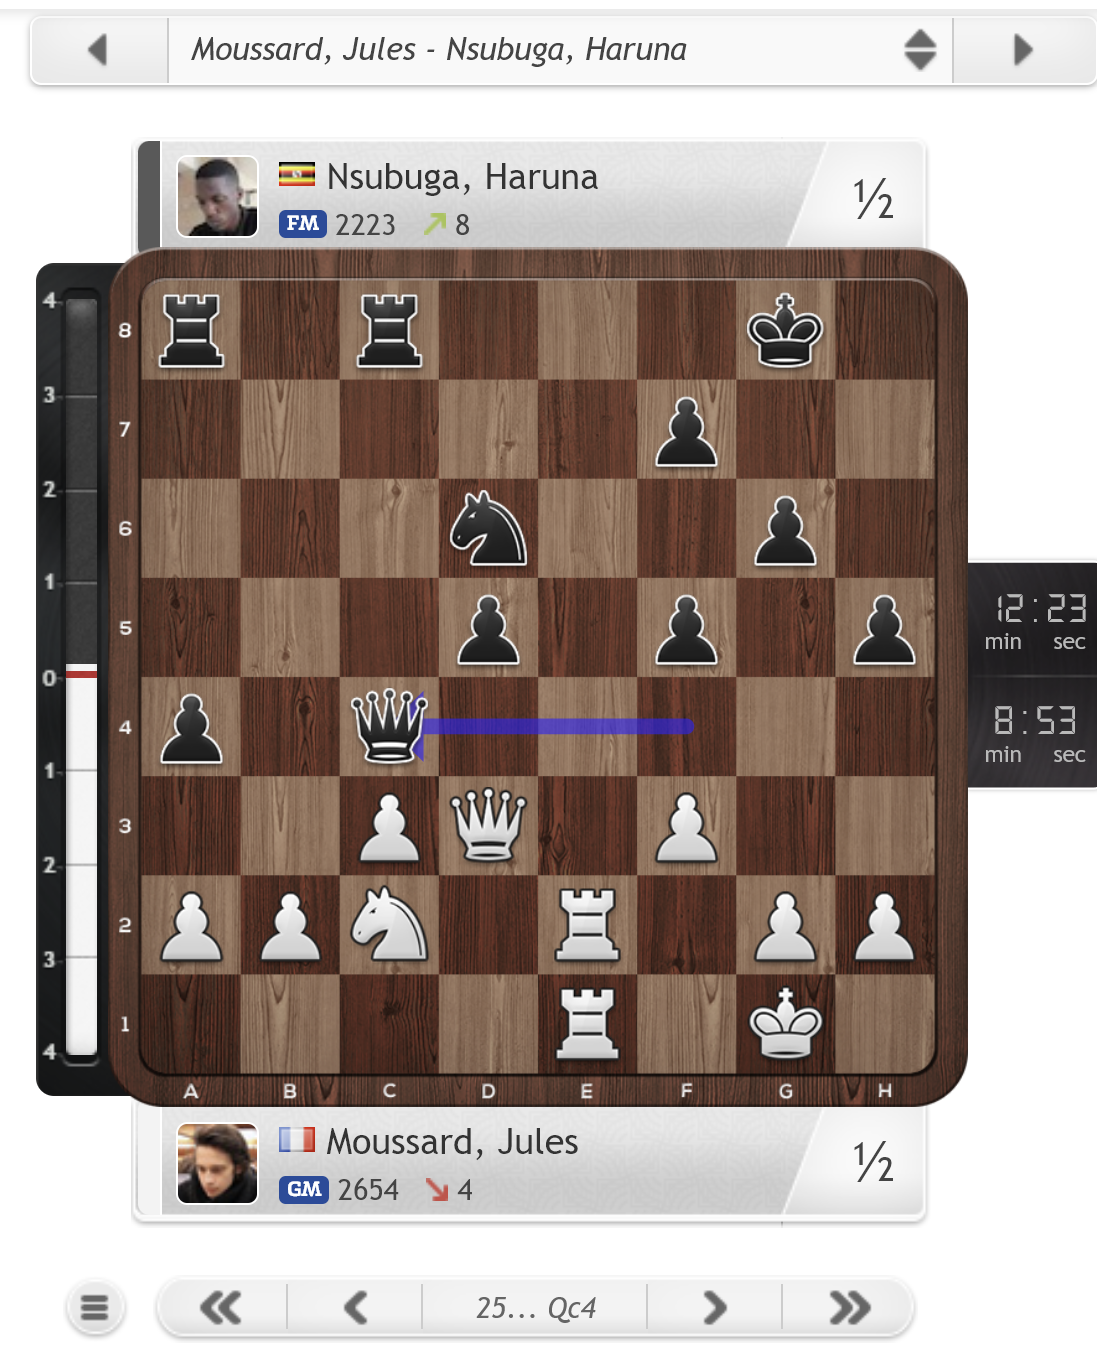 Budapest Gambit Smothered Mate In 8 #chess